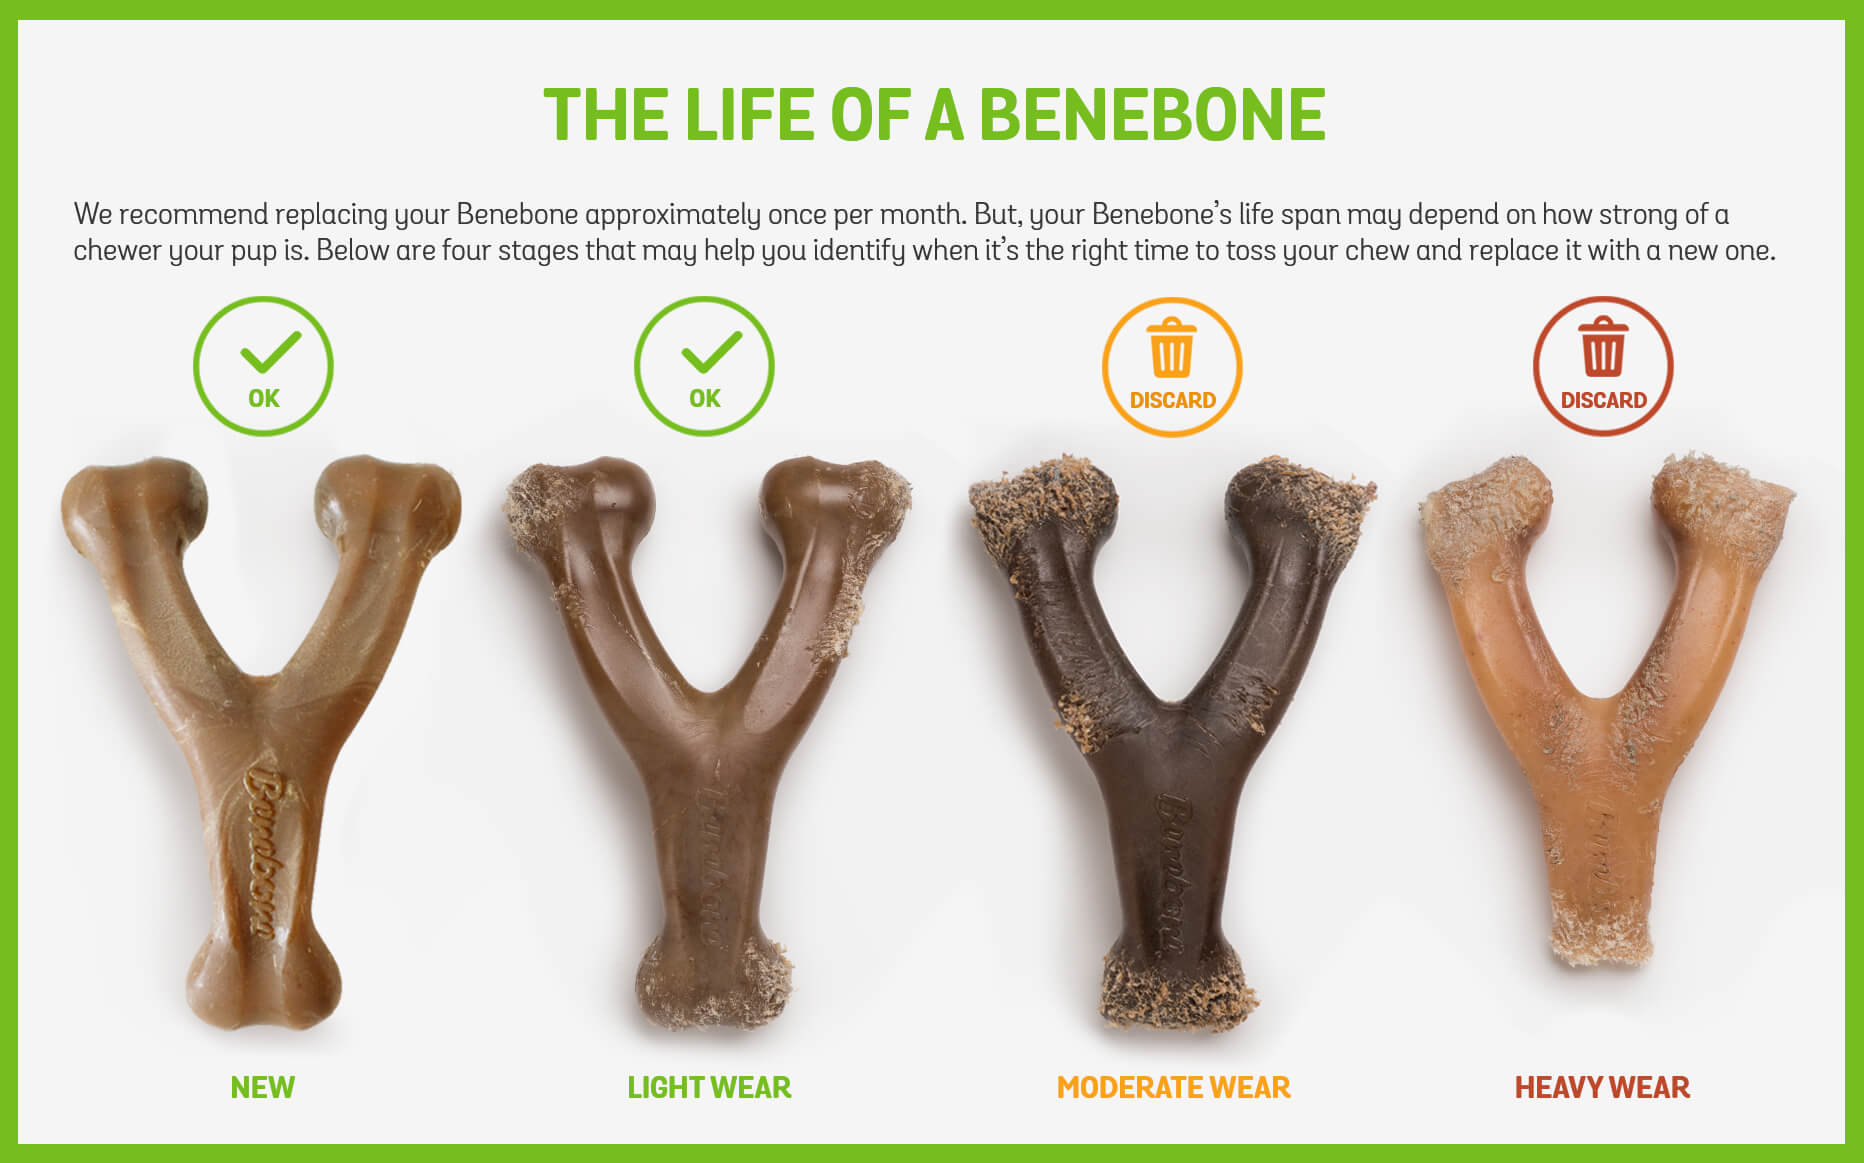 Benebone Maple & Bacon Sticks: Guidelines for when to replace the chew sticks, ensuring optimal safety and enjoyment for your dog.